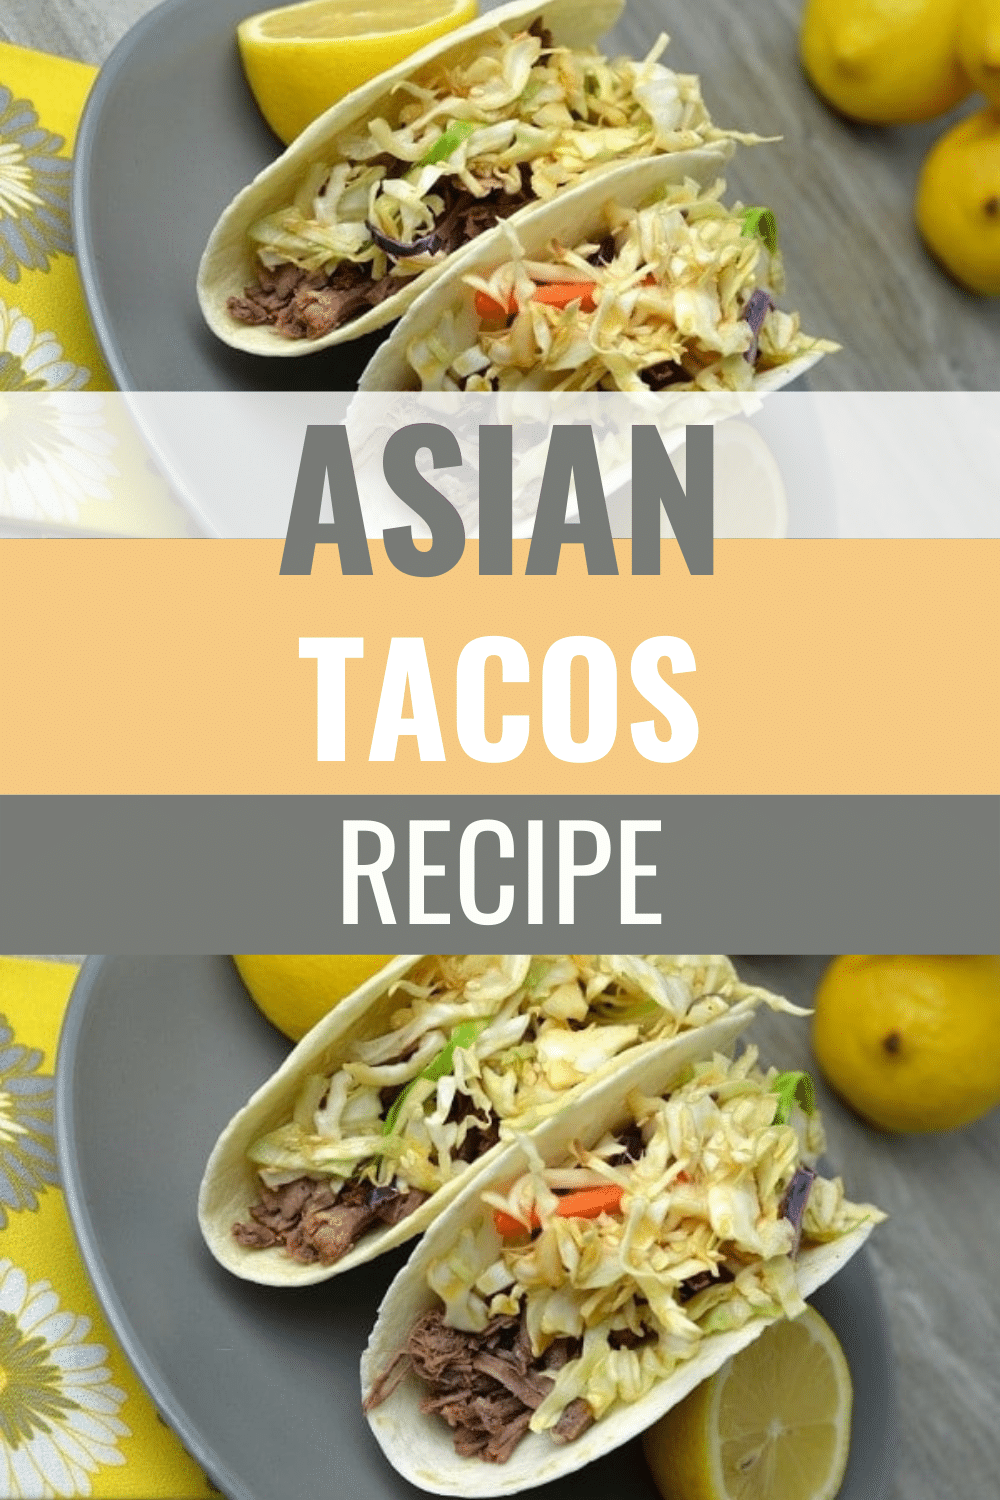 Asian Tacos are a tasty marriage of Asian flavors and Mexican food portability. Even better, they're easy and affordable to make too! #asianfood #mexicanfood #tacos via @wondermomwannab